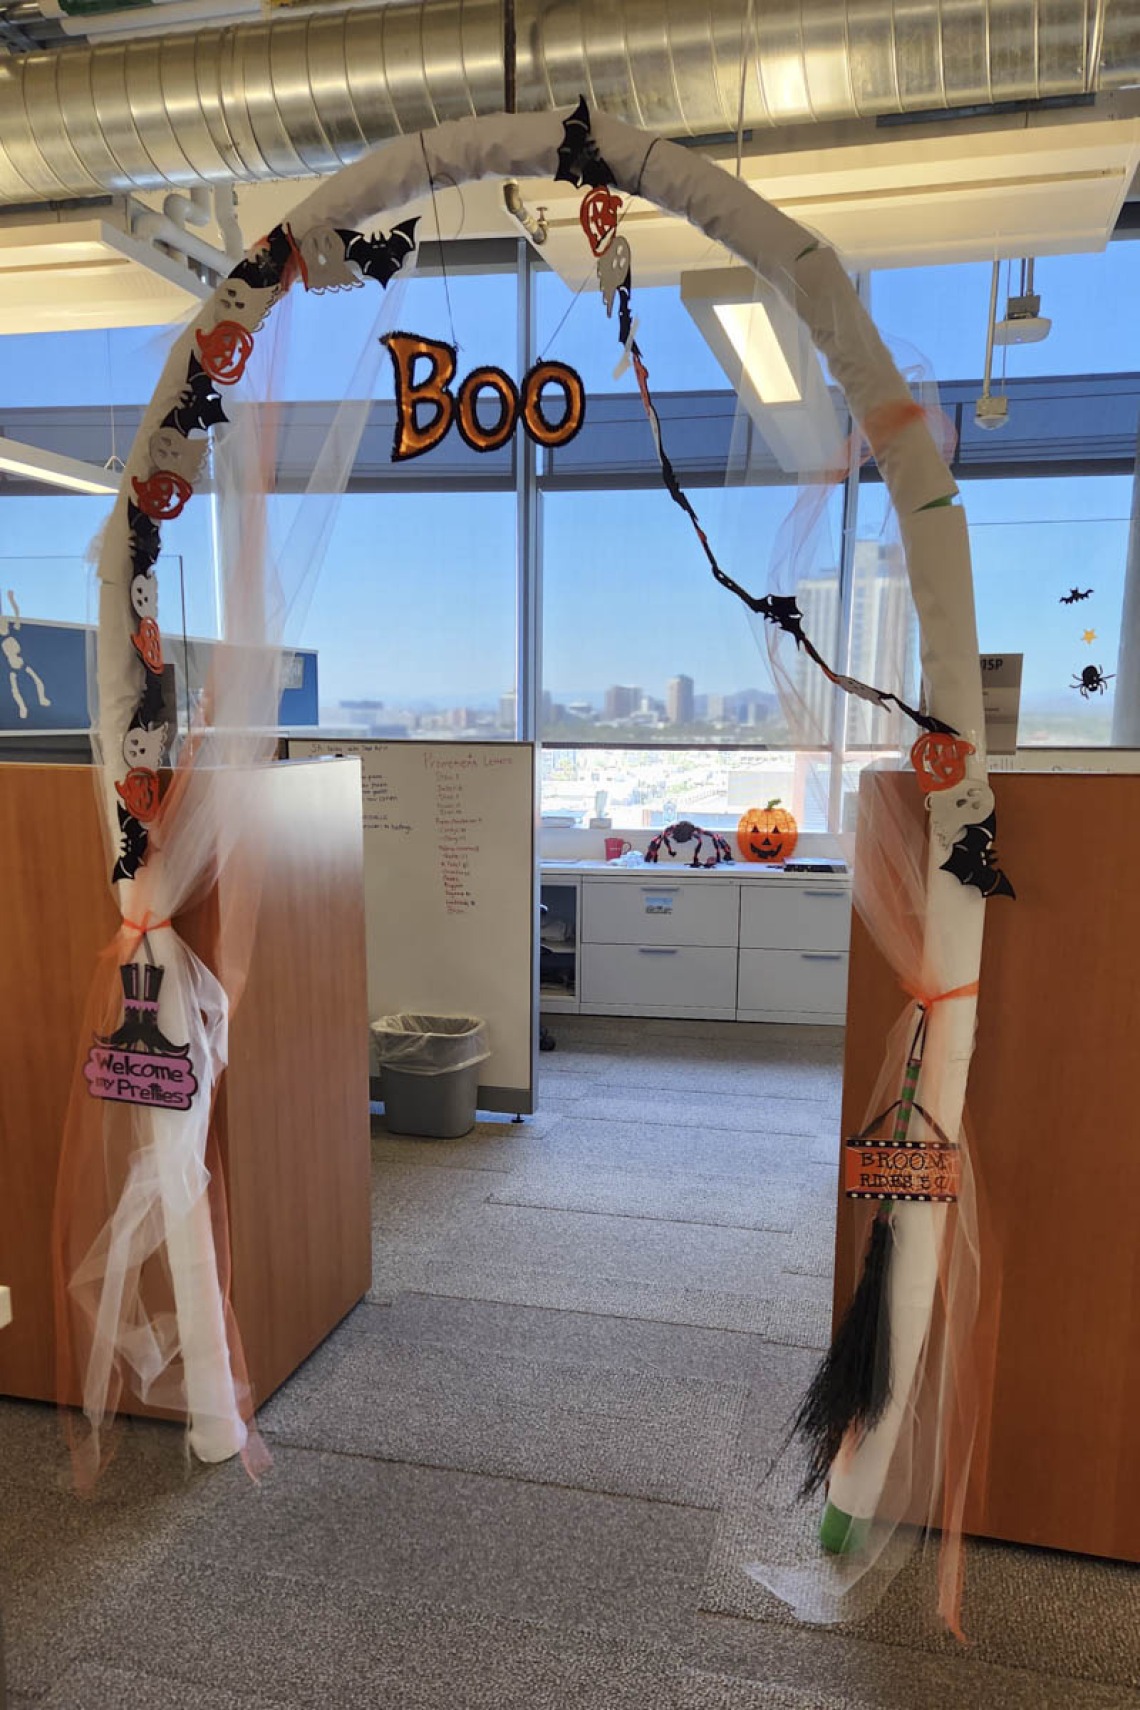 Halloween decorations create an archway between cubicles in an office. the word "Boo" hangs from the top.